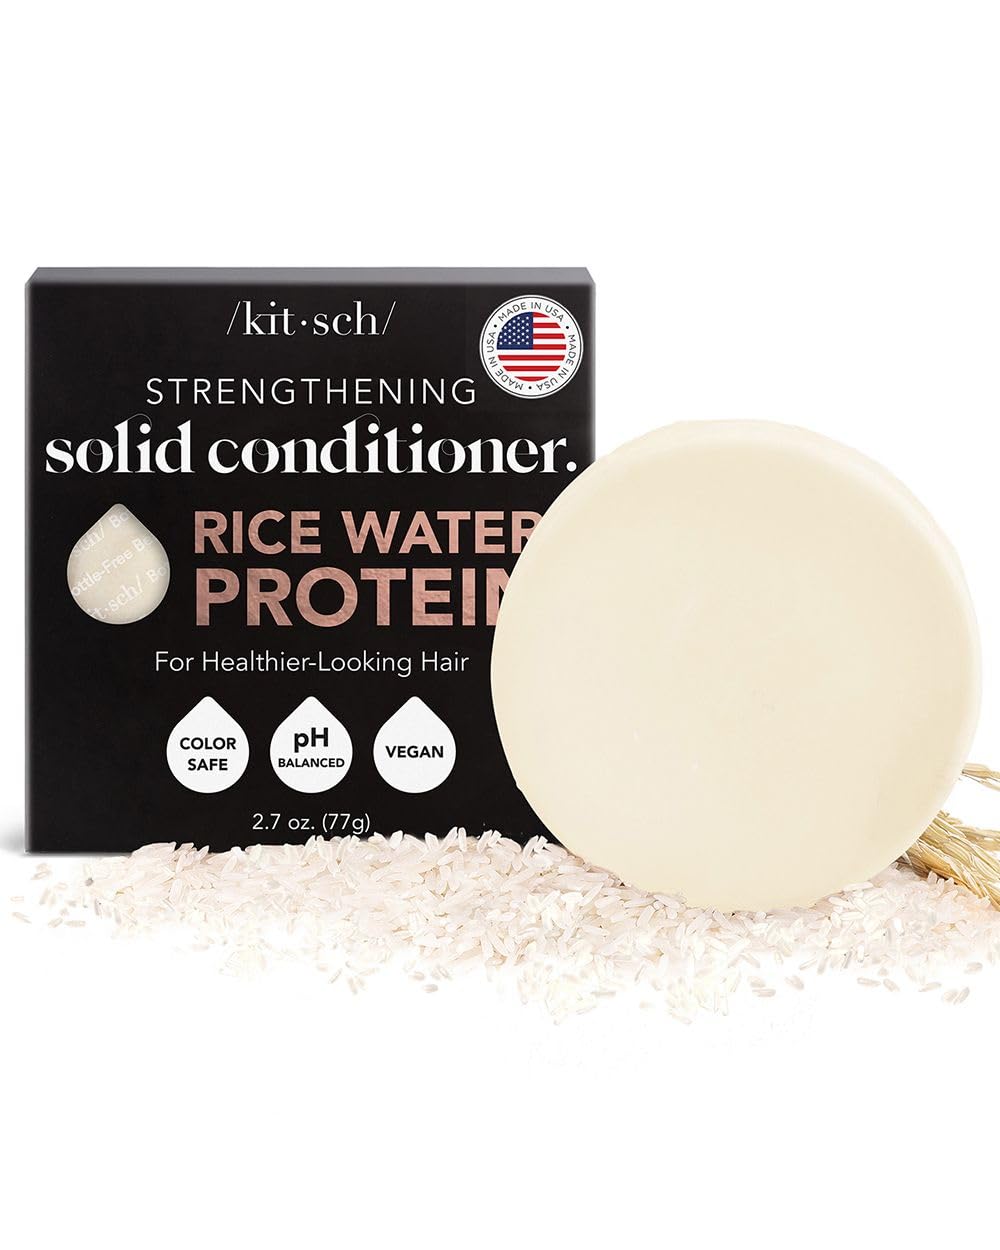 Kitsch Rice Water Protein Conditioner Bar Review